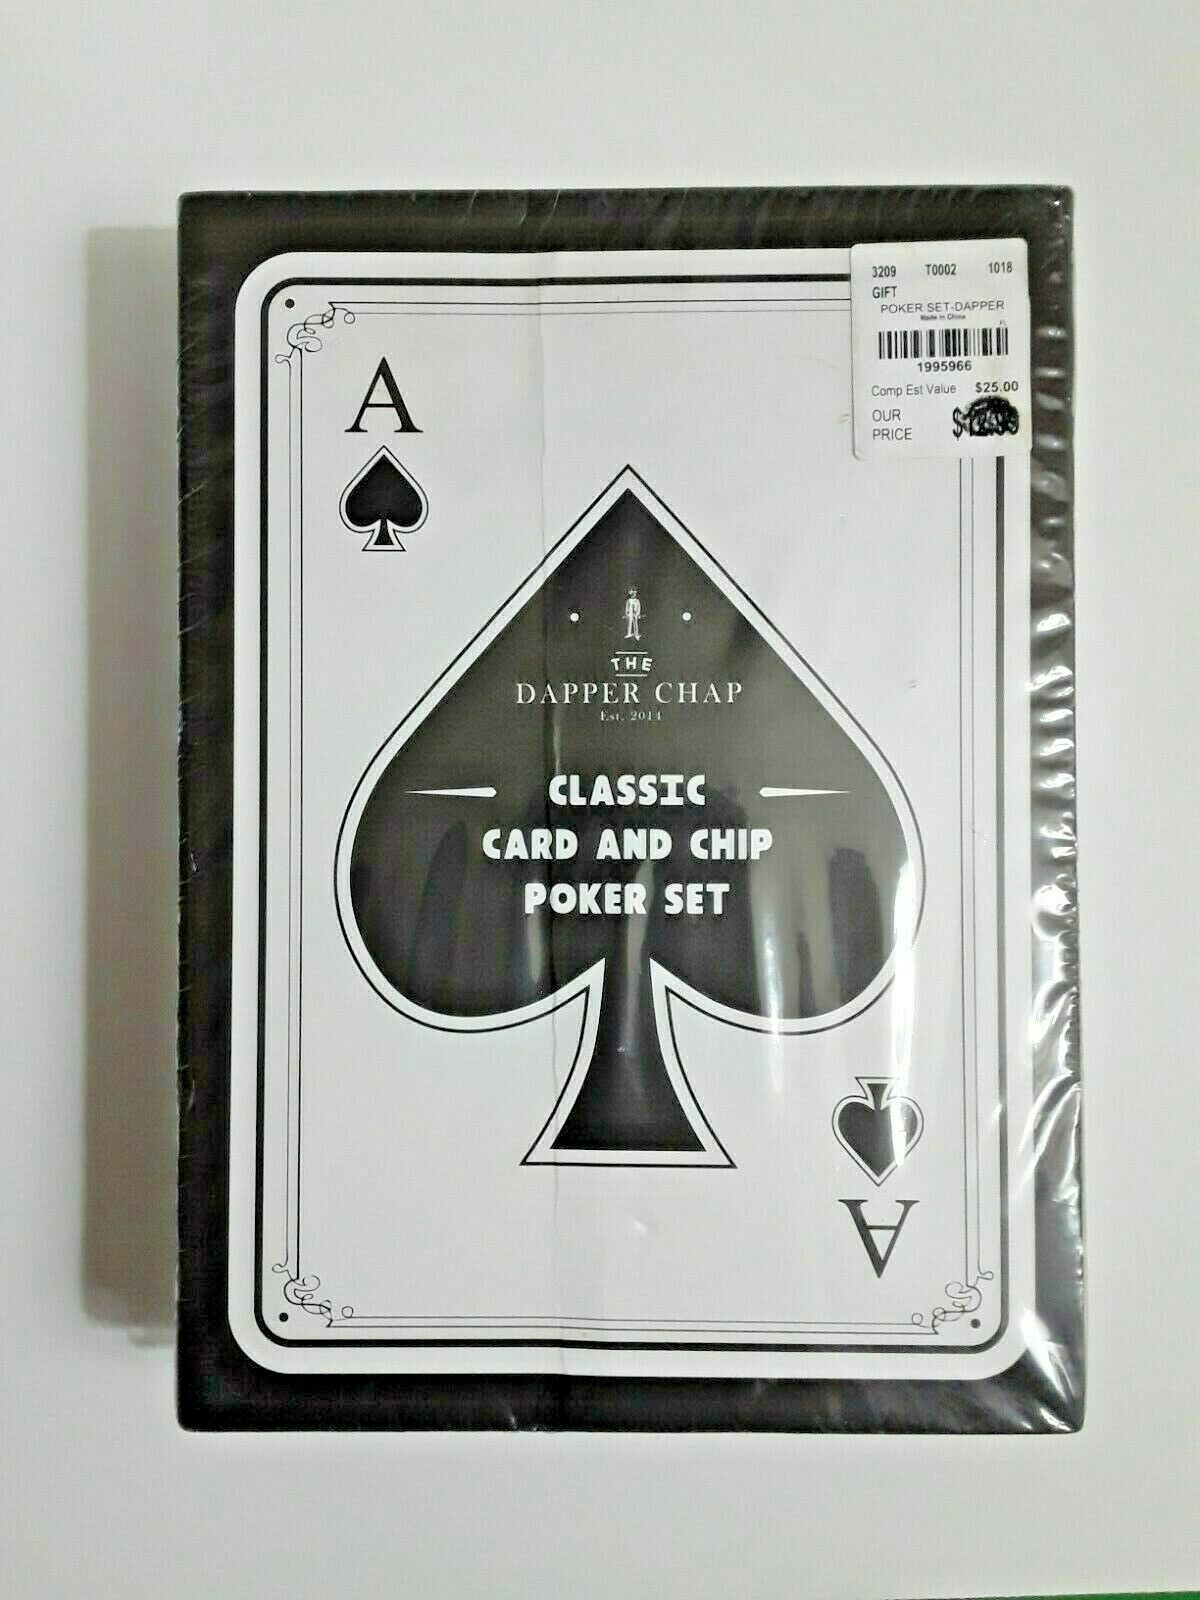 The Dapper Chap Classic Card And Chip Poker Set, Includes Cards And Poker Chips